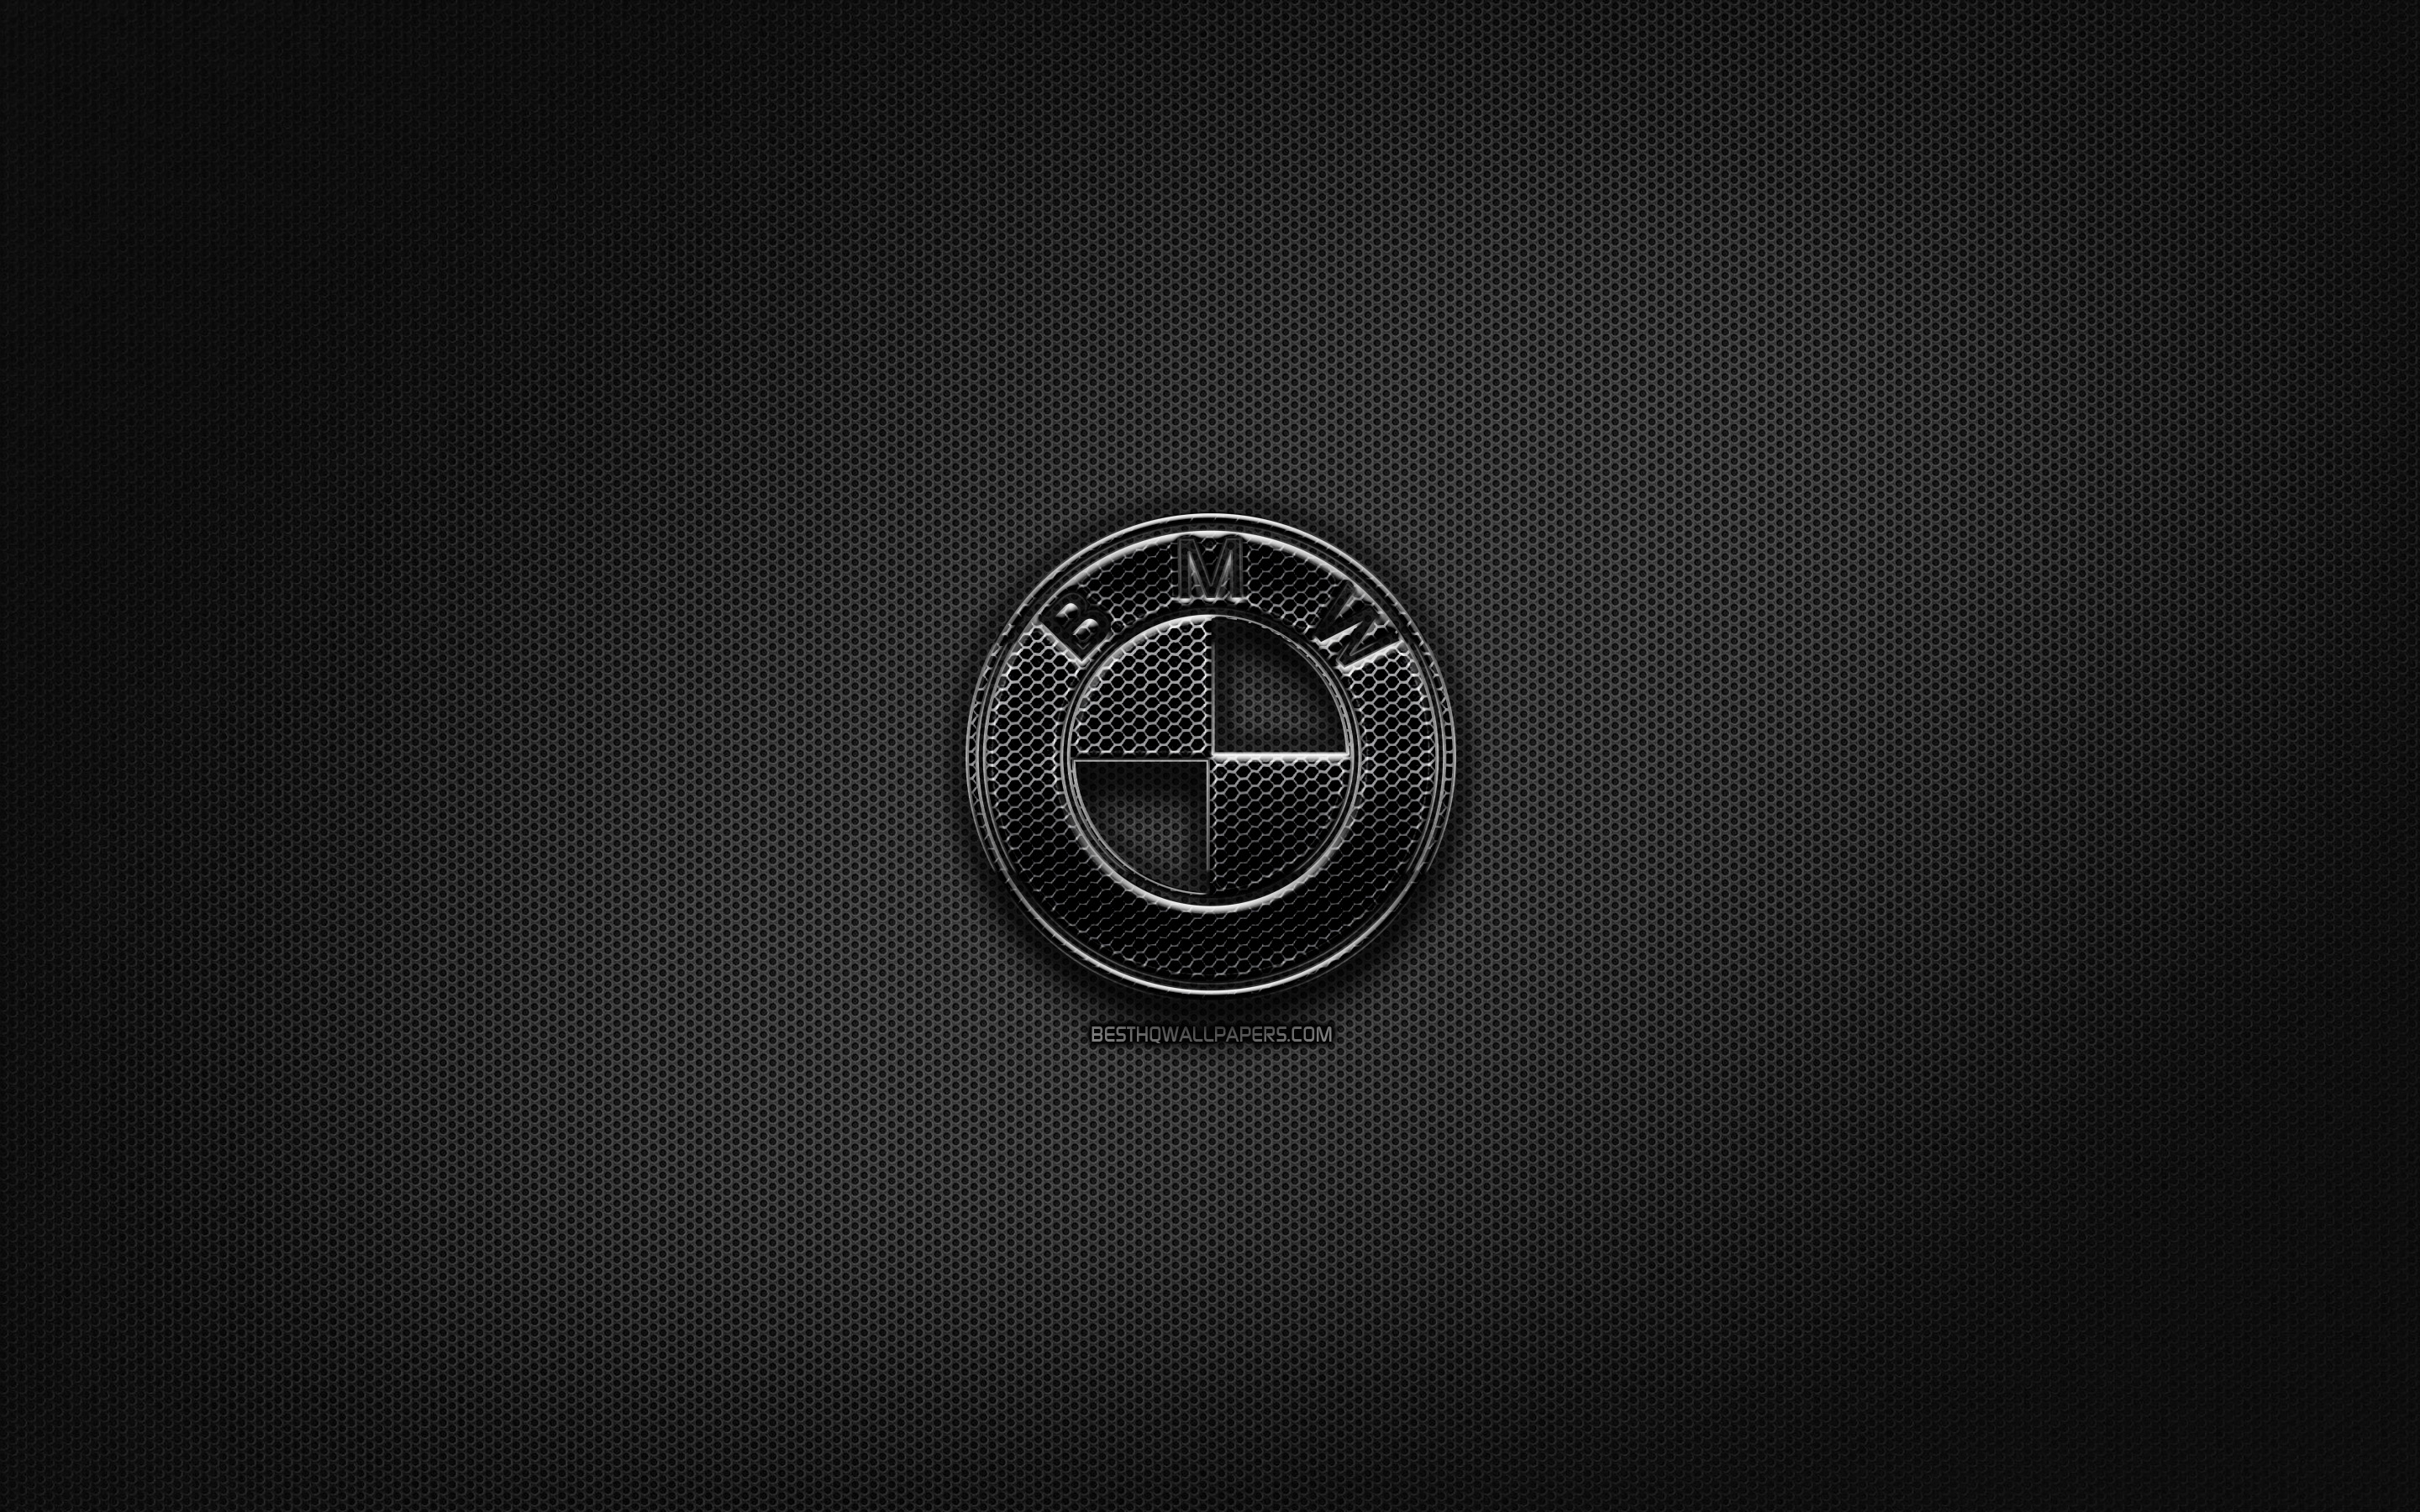 Download wallpapers BMWblack logo, creative, cars brands, metal grid  background, BMW logo, brands, BMW for desktop with resolution 2880x1800.  High Quality HD pictures wallpapers